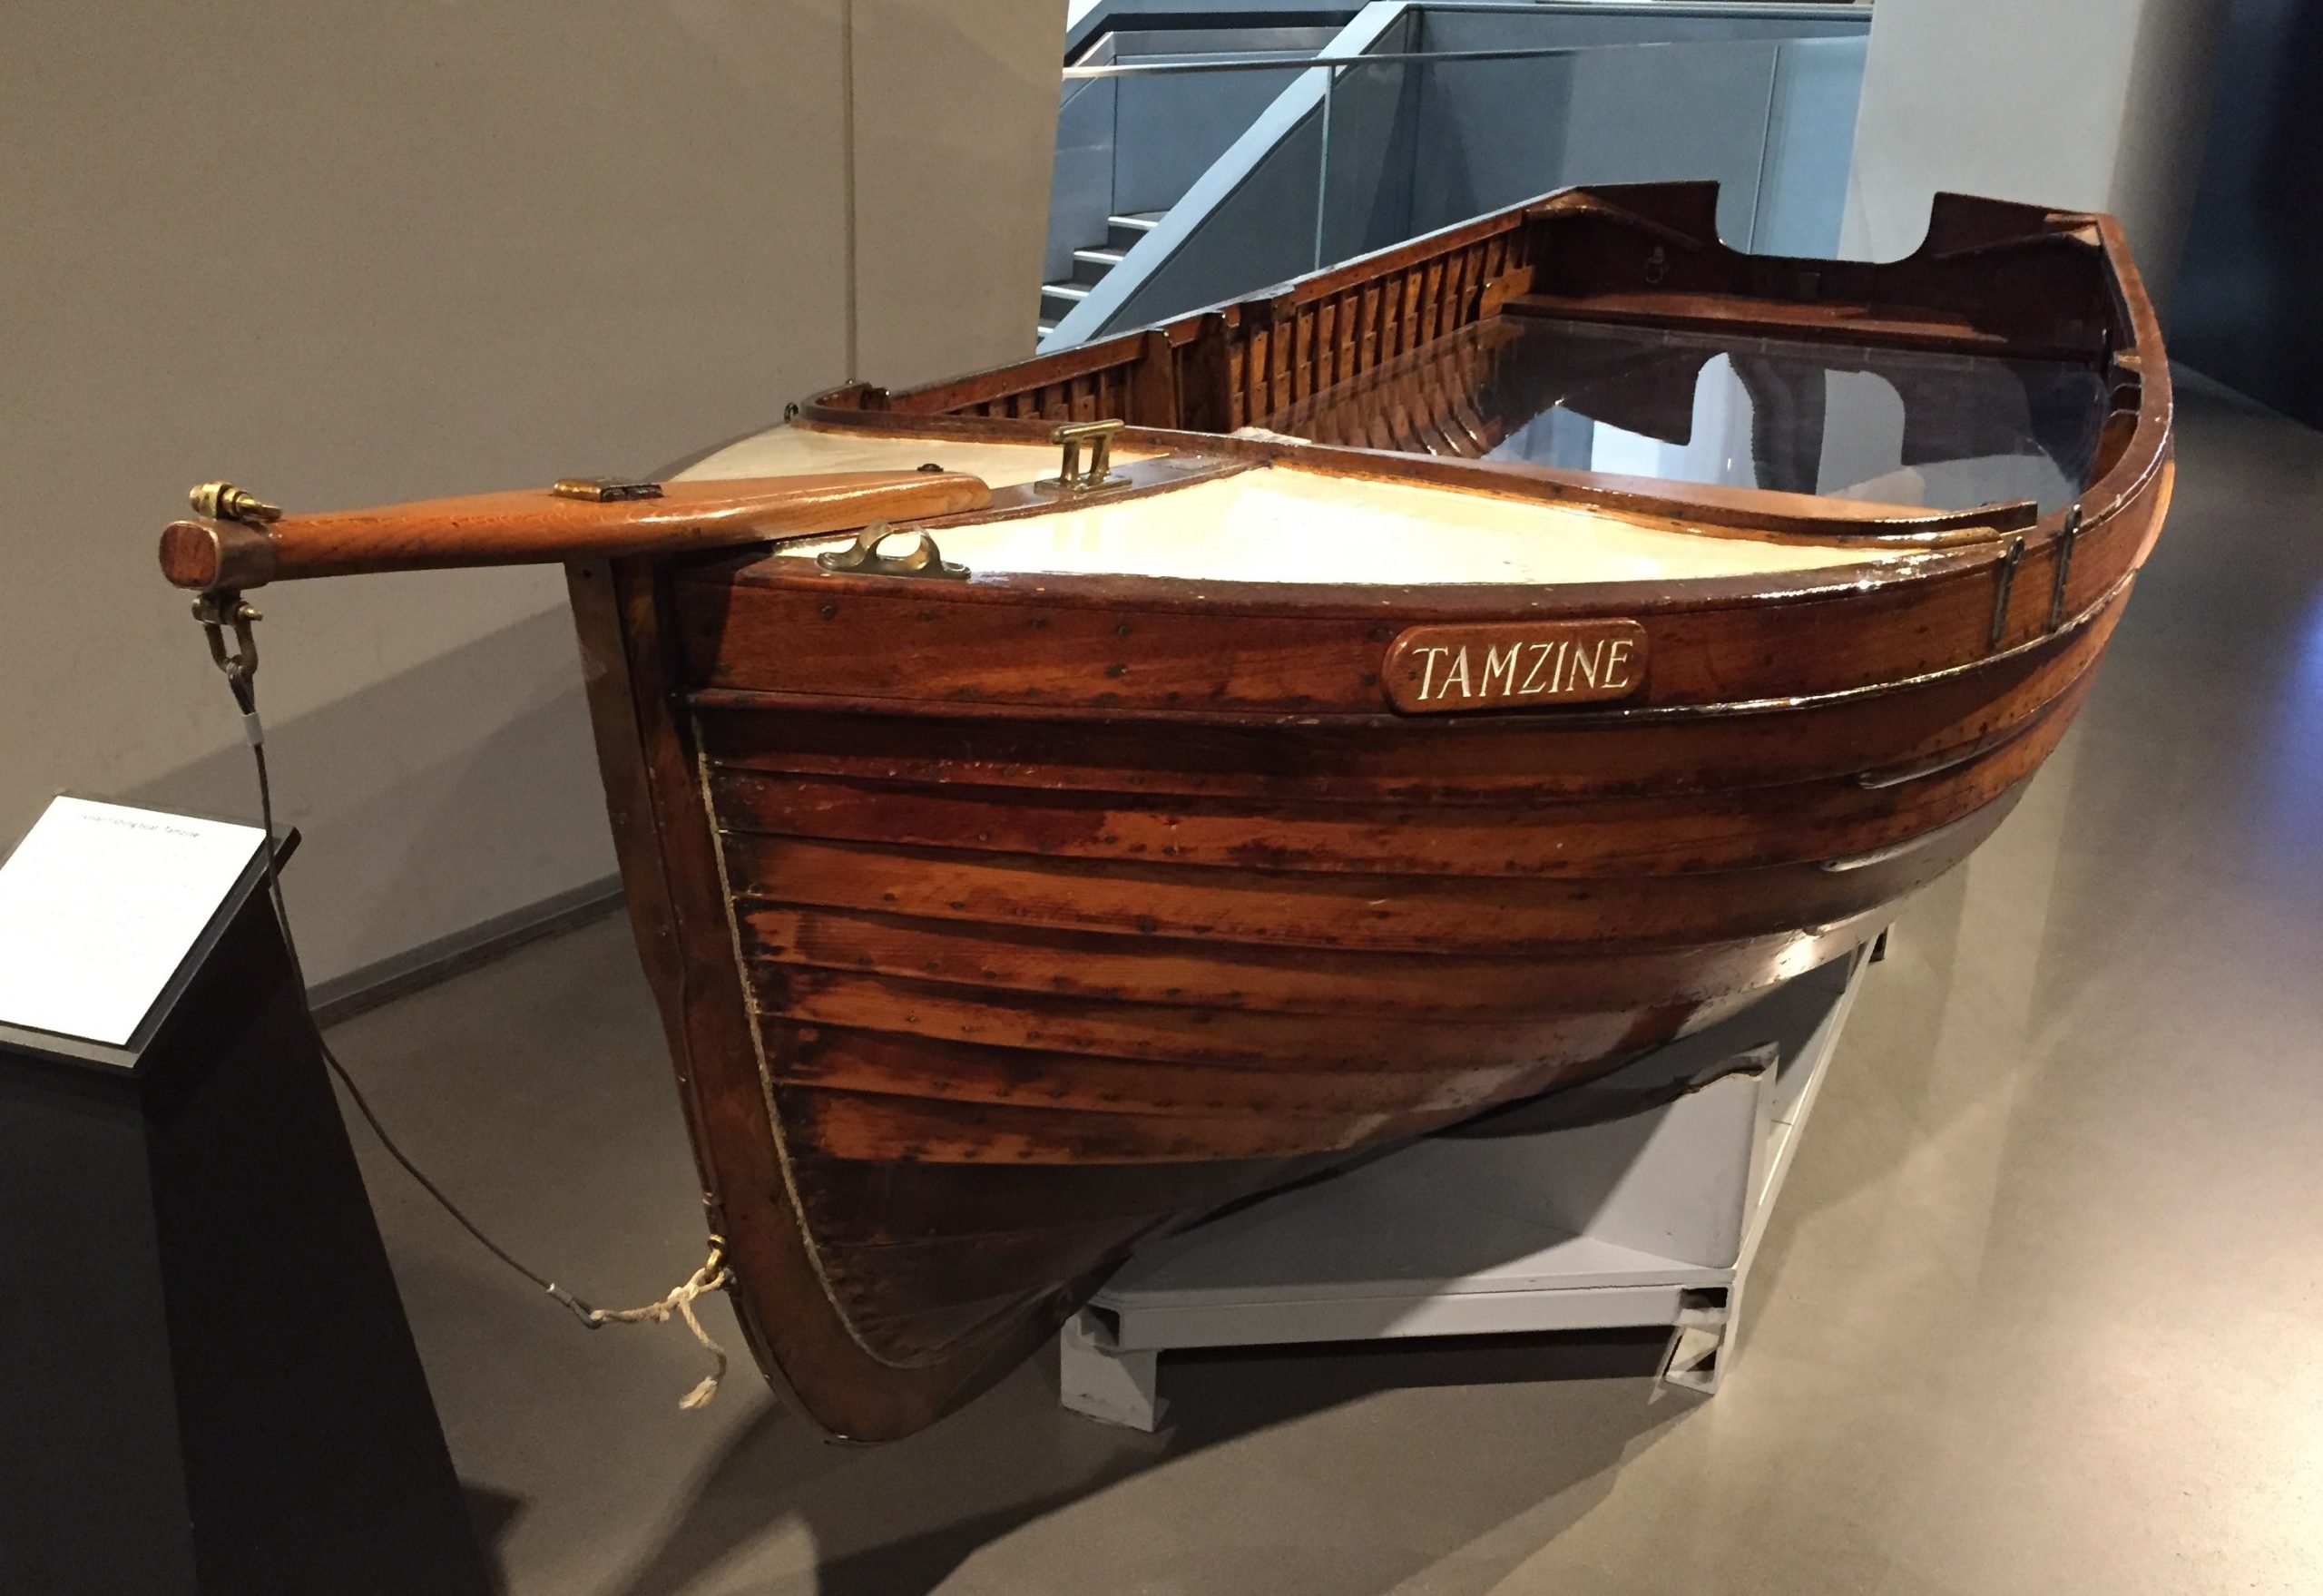 Tamzine, one of the “little boats” used in the evacuation of Dunkirk, at the Imperial War Museum (Photo: Sarah Sundin, September 2017)